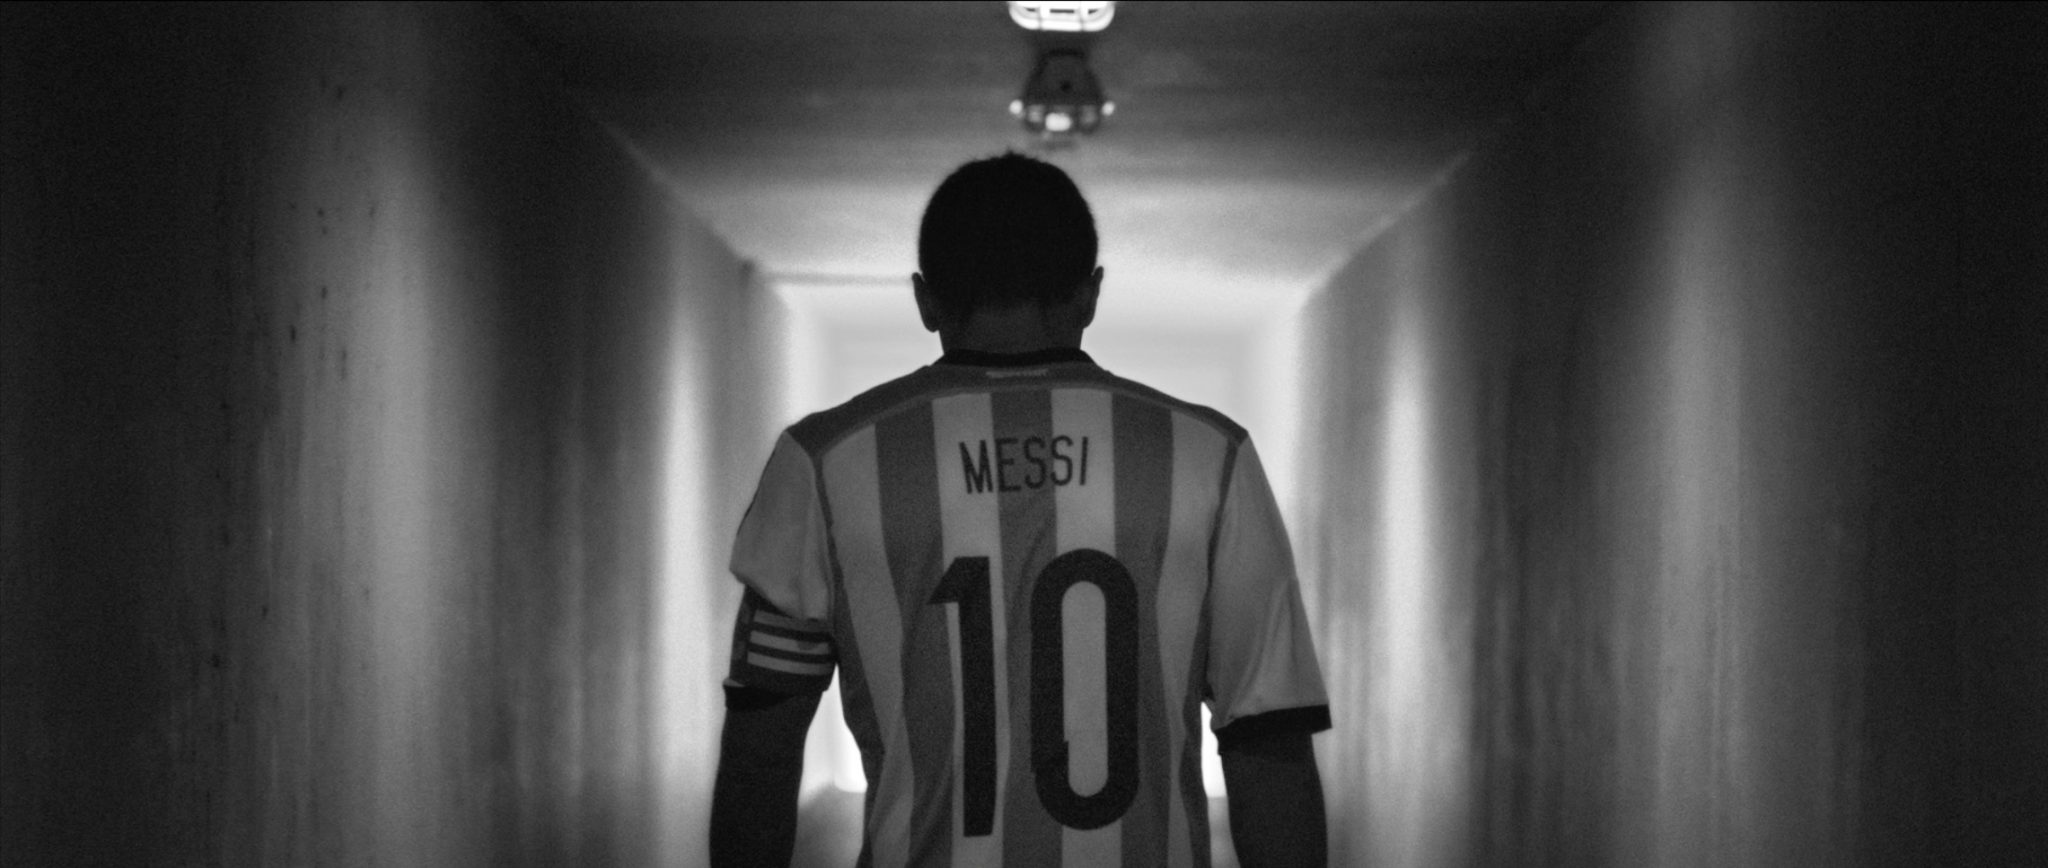 Messi Tunnel